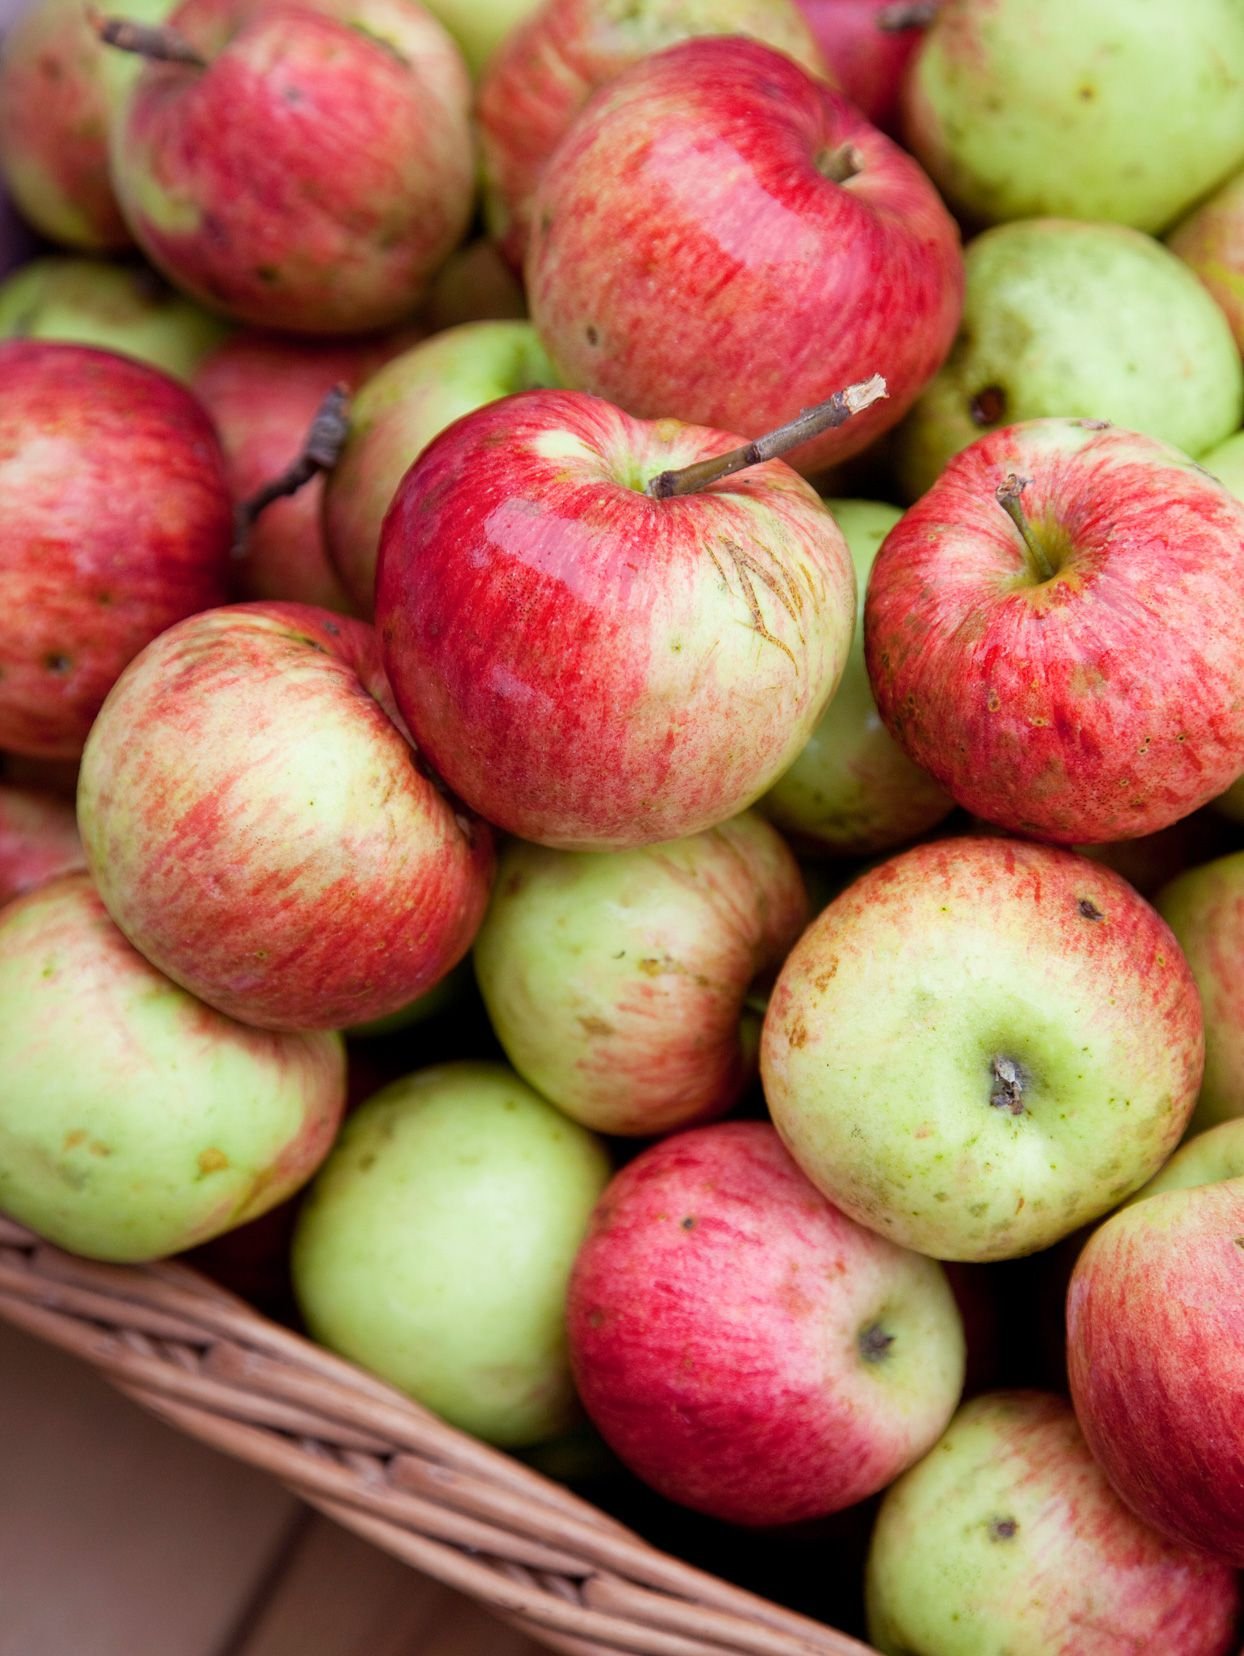 How to Prep Apples for Apple Pie in 3 Simple Steps